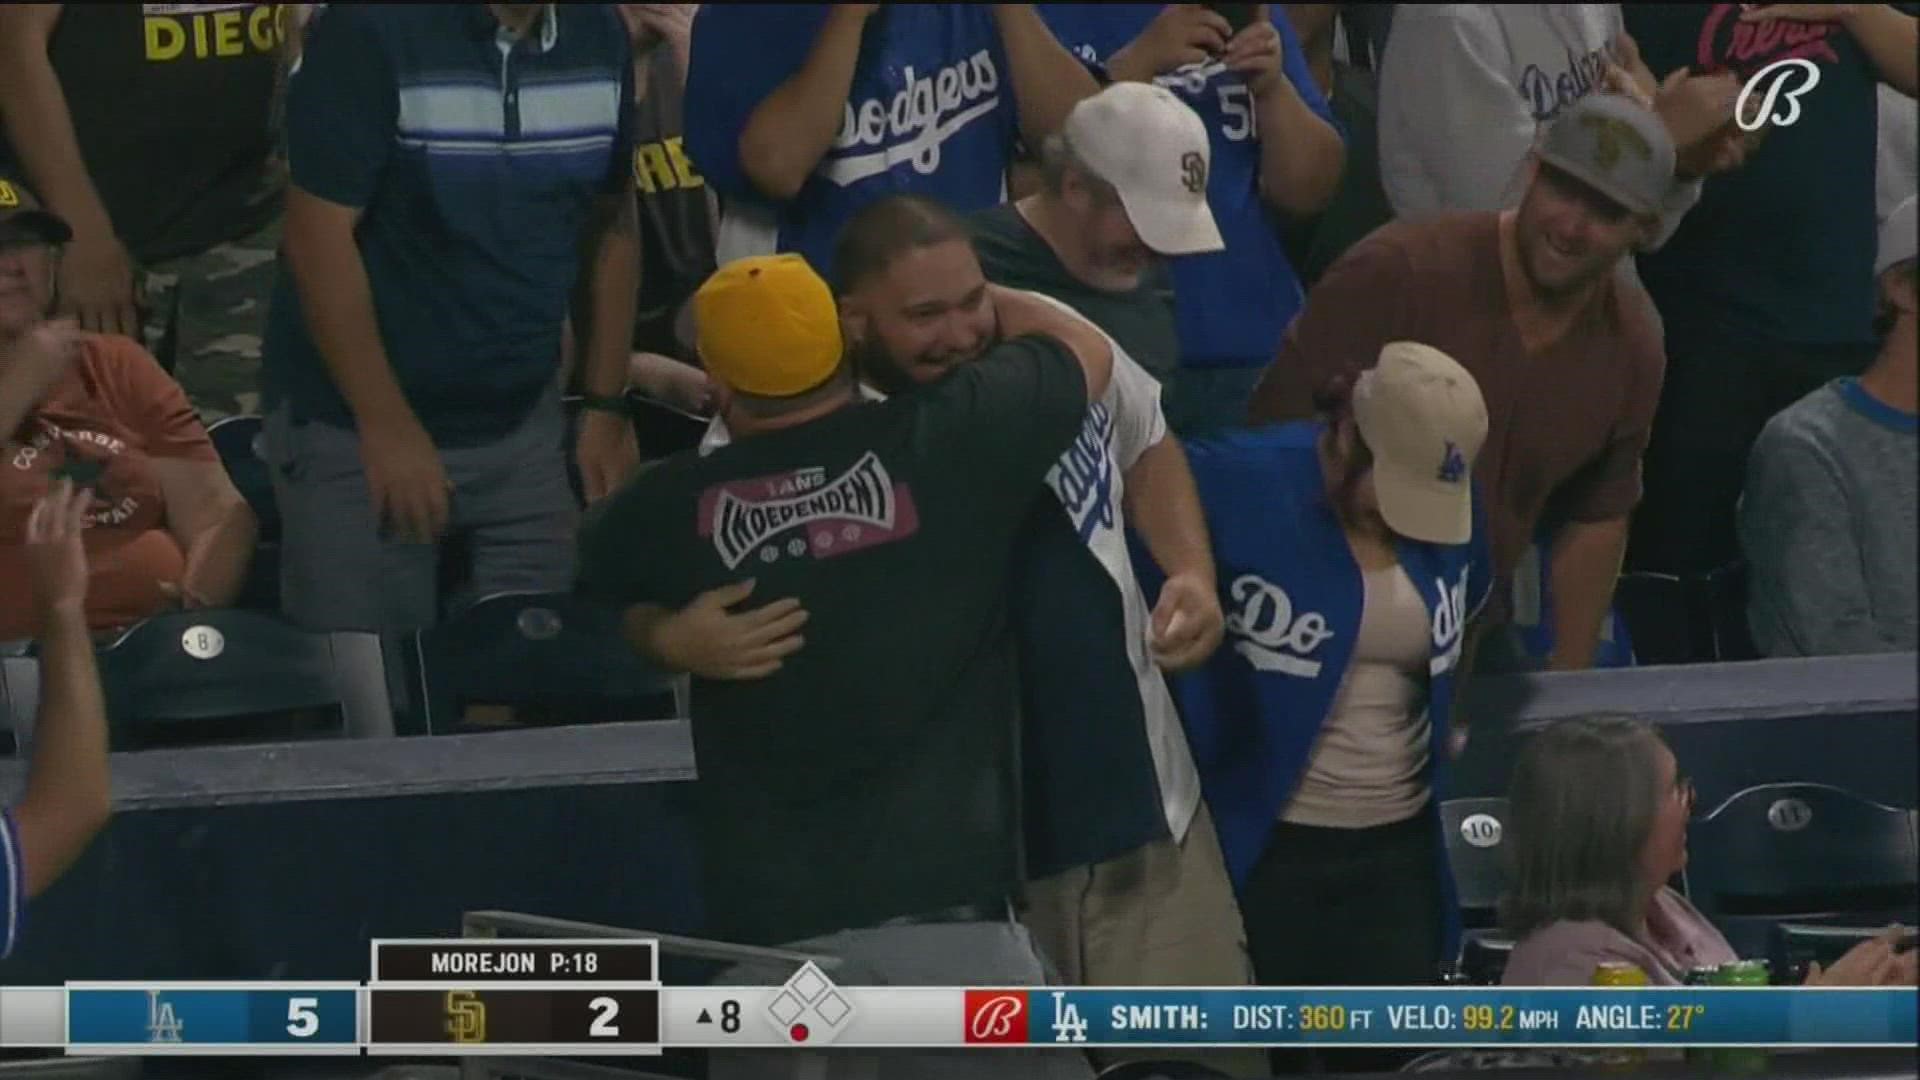 For Padres fans, there is no team we love to hate more than the Dodgers, but apparently the feeling isn’t mutual.